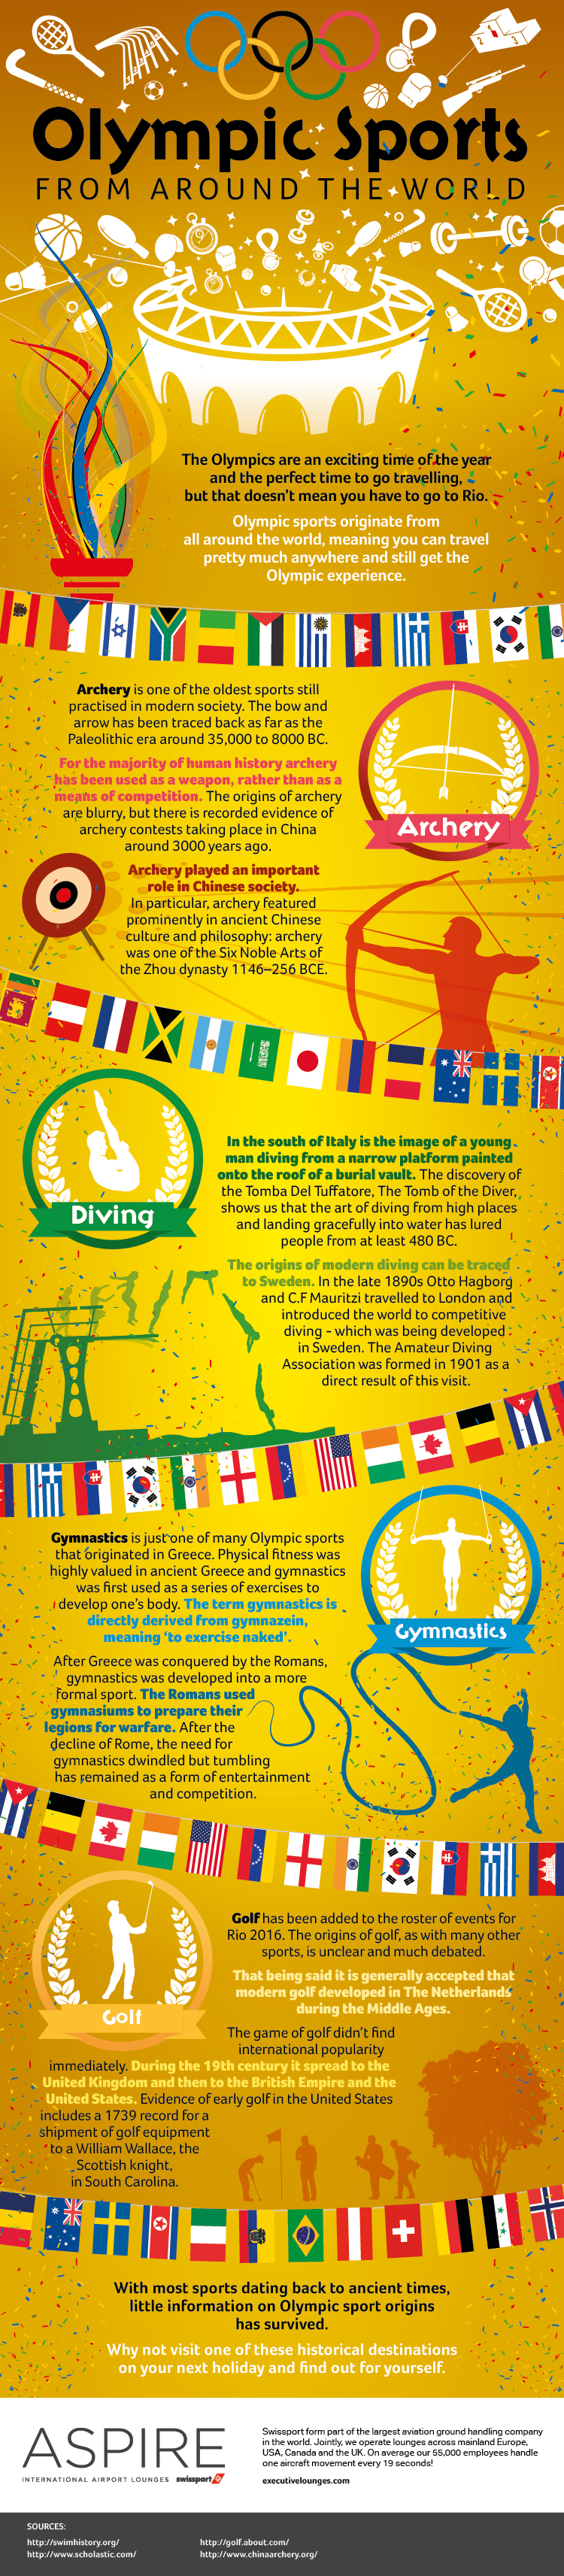 Olympic sports from around the world infographic